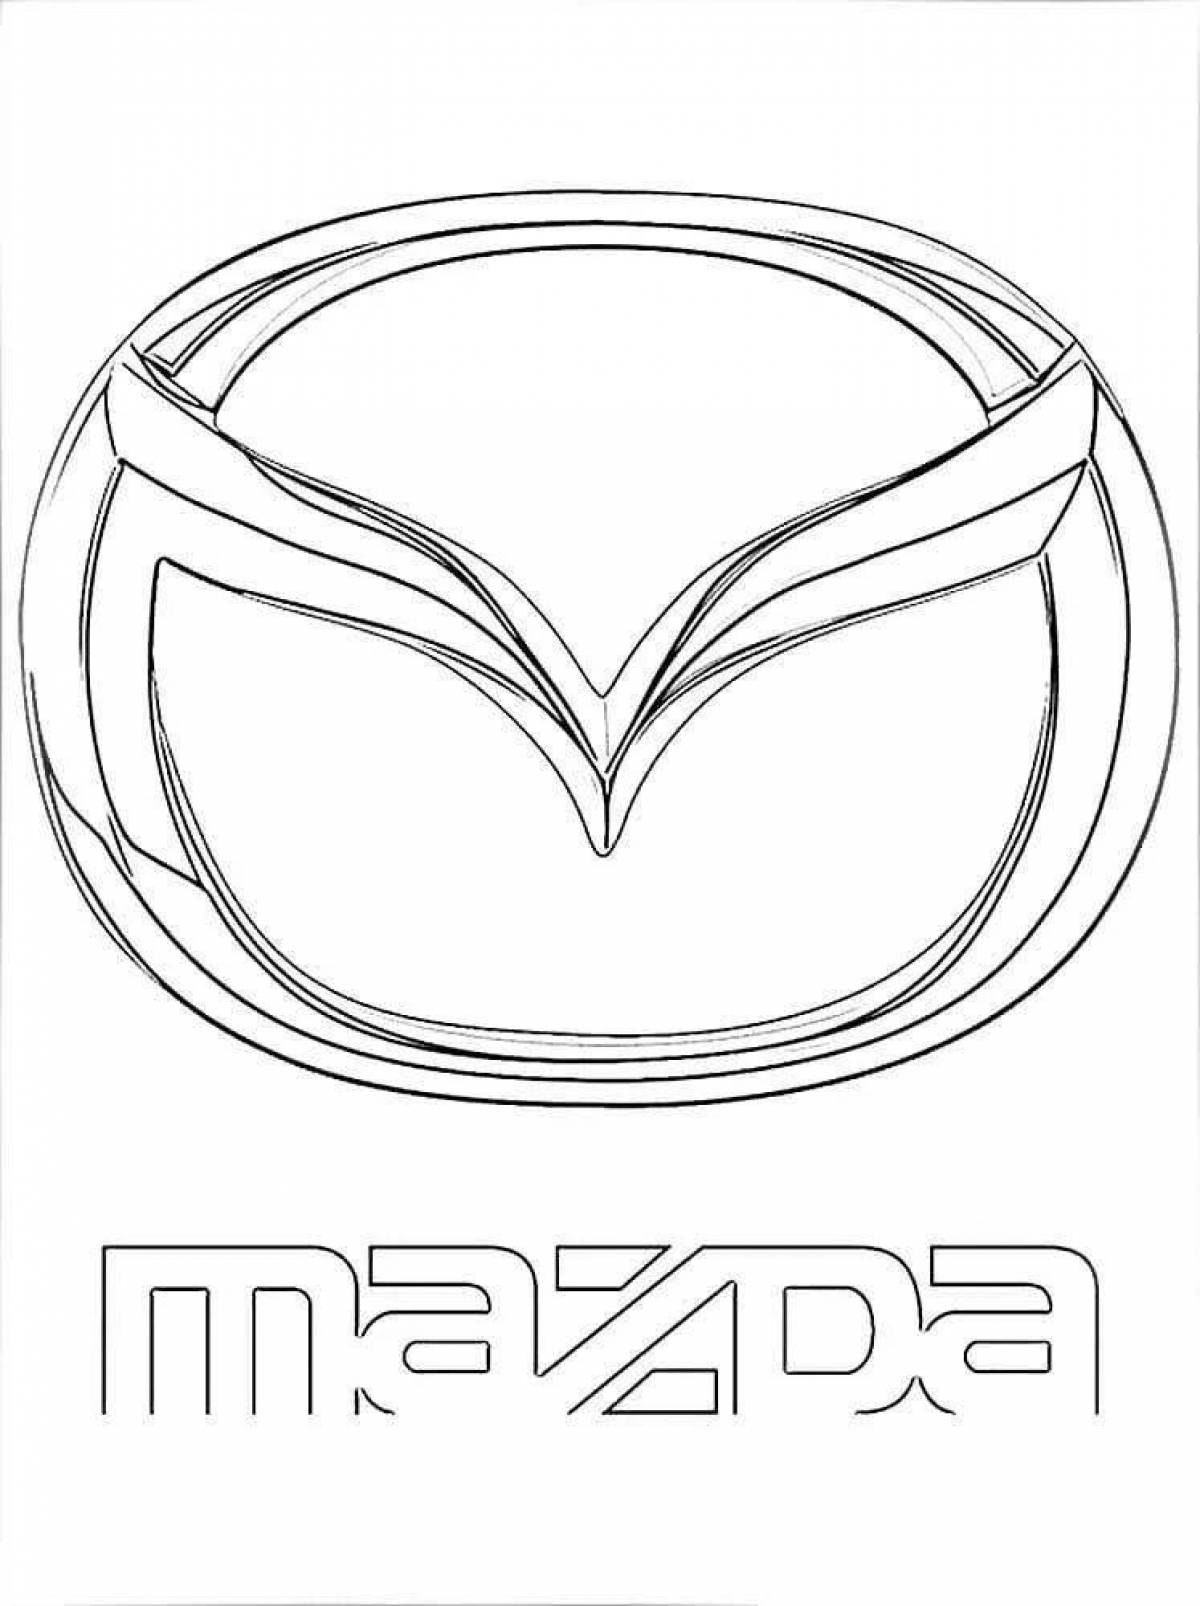 Intriguing logo coloring page